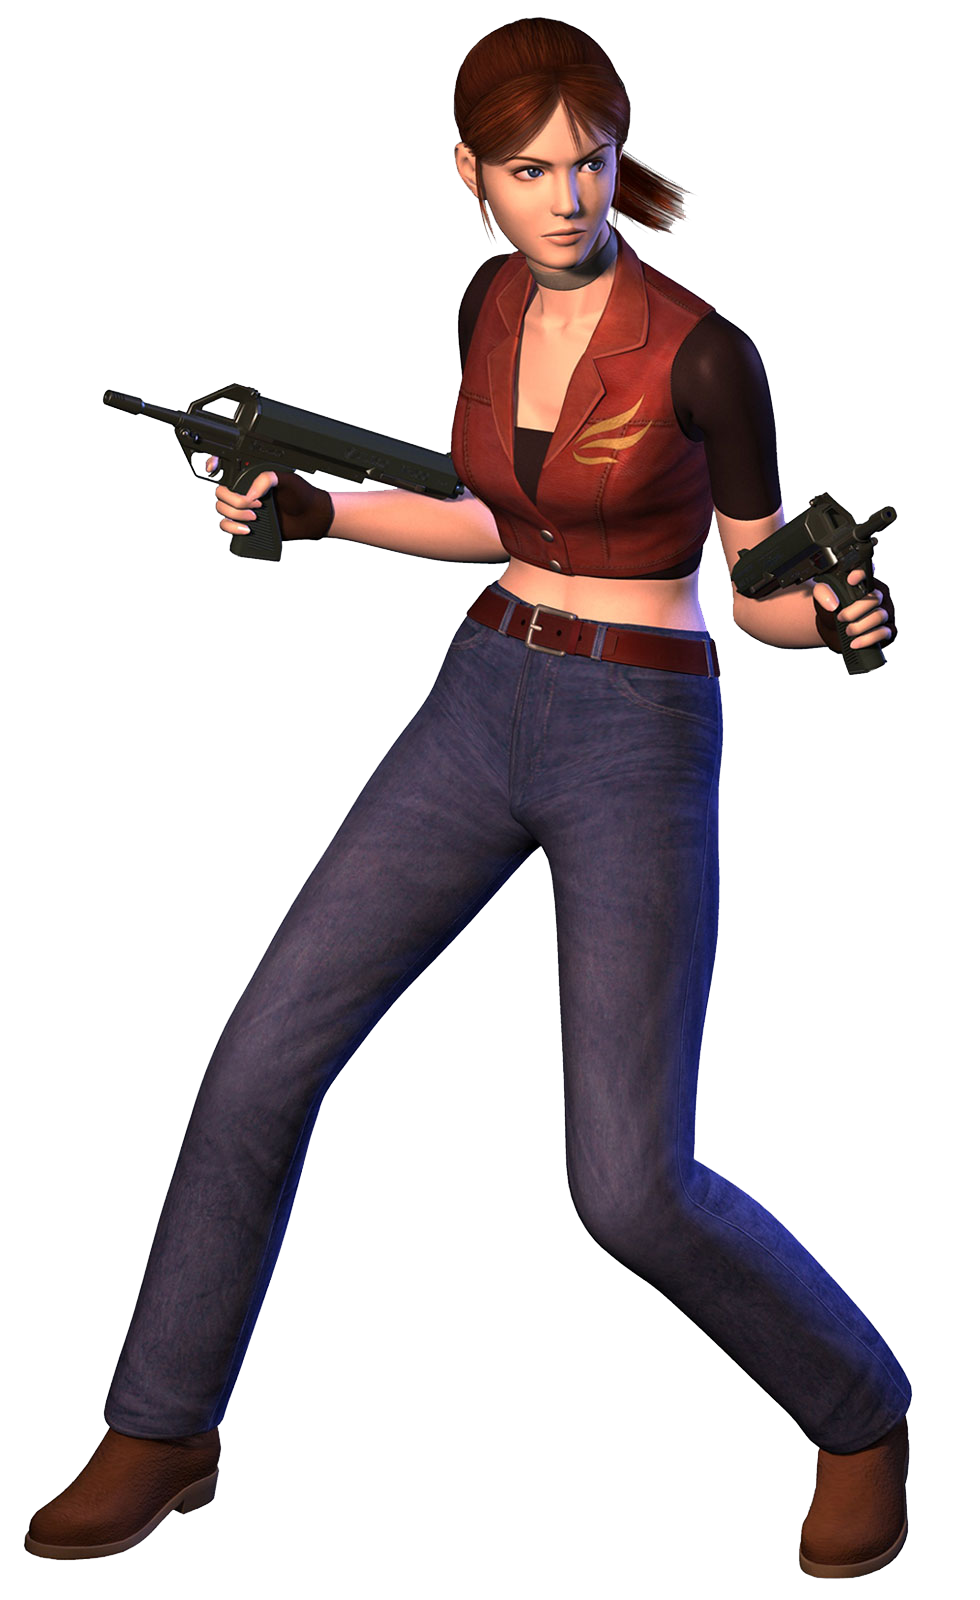 Claire Redfield - Resident Evil: CODE: Veronica X Guide - IGN